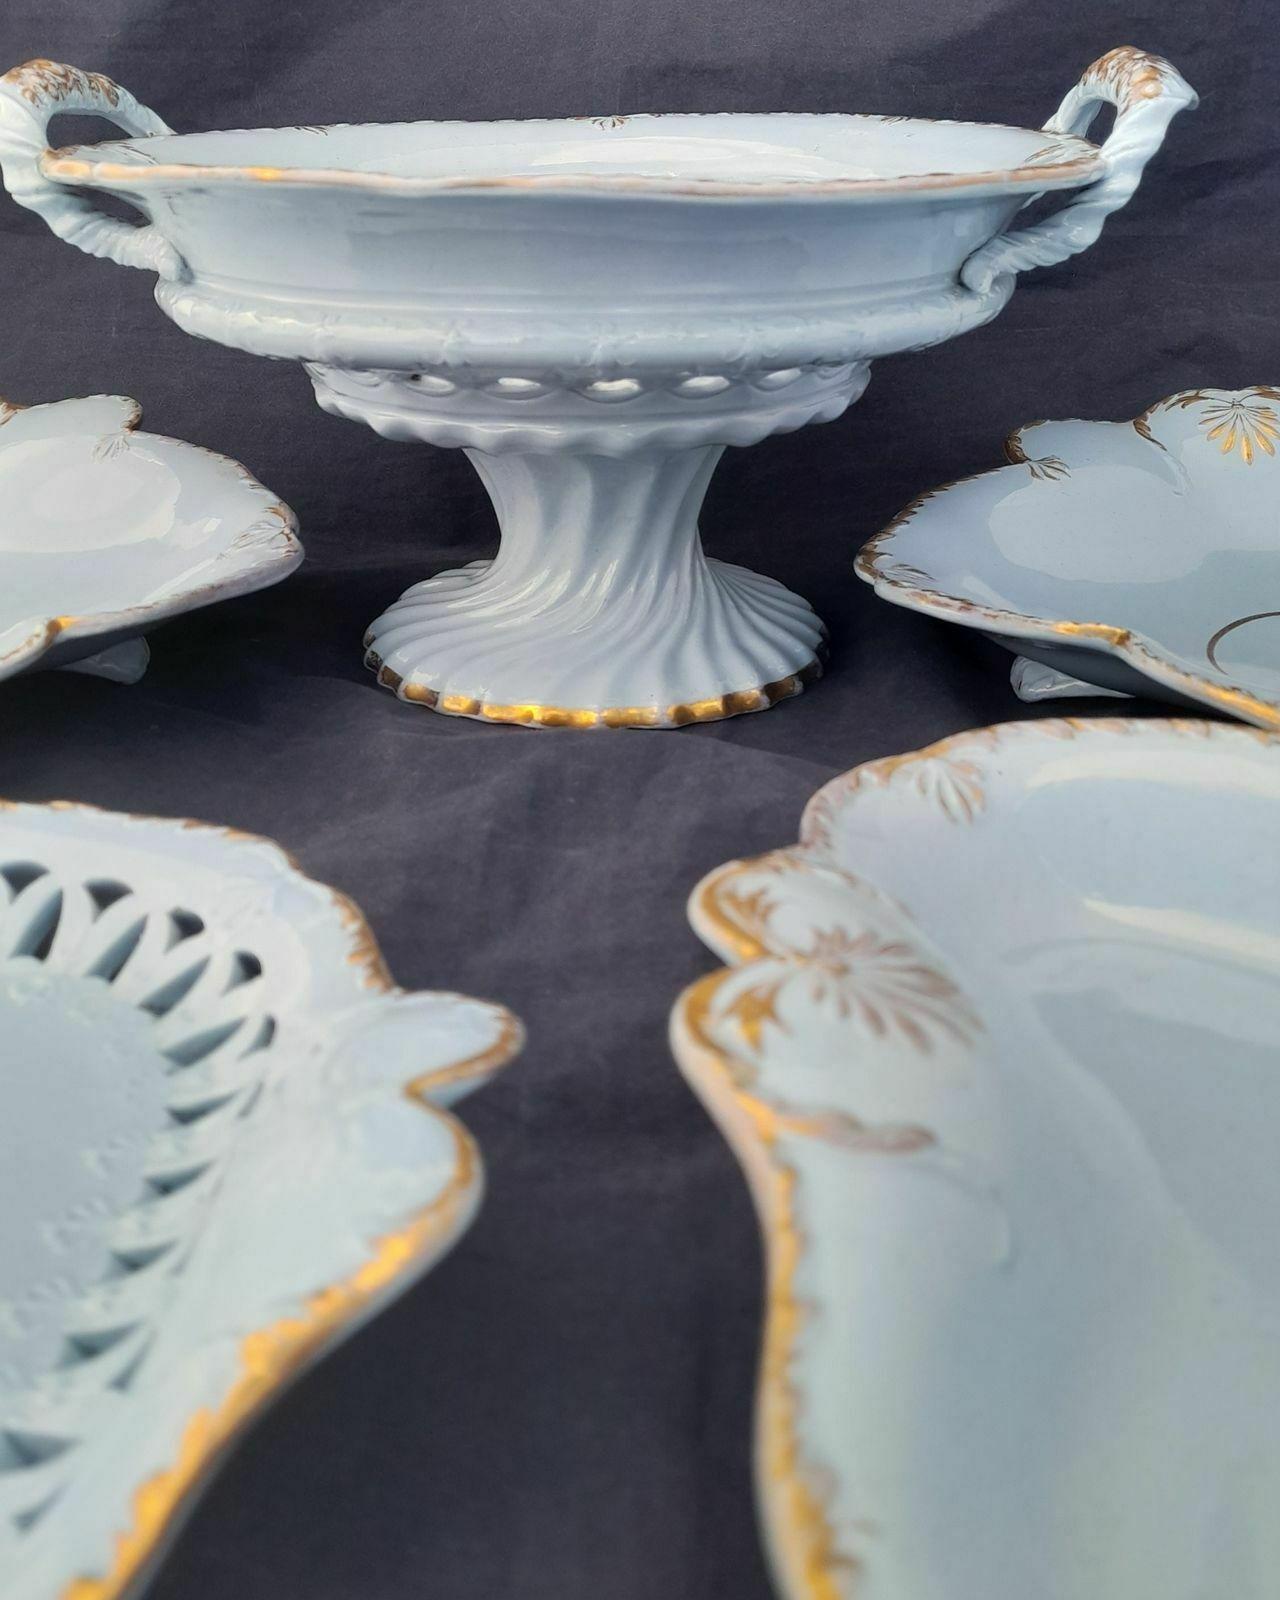 Antique William Ridgway & Co Pale Blue Earthenware Part Dessert Service circa 1830 - low relief moulded pierced and gilded with handles five pieces